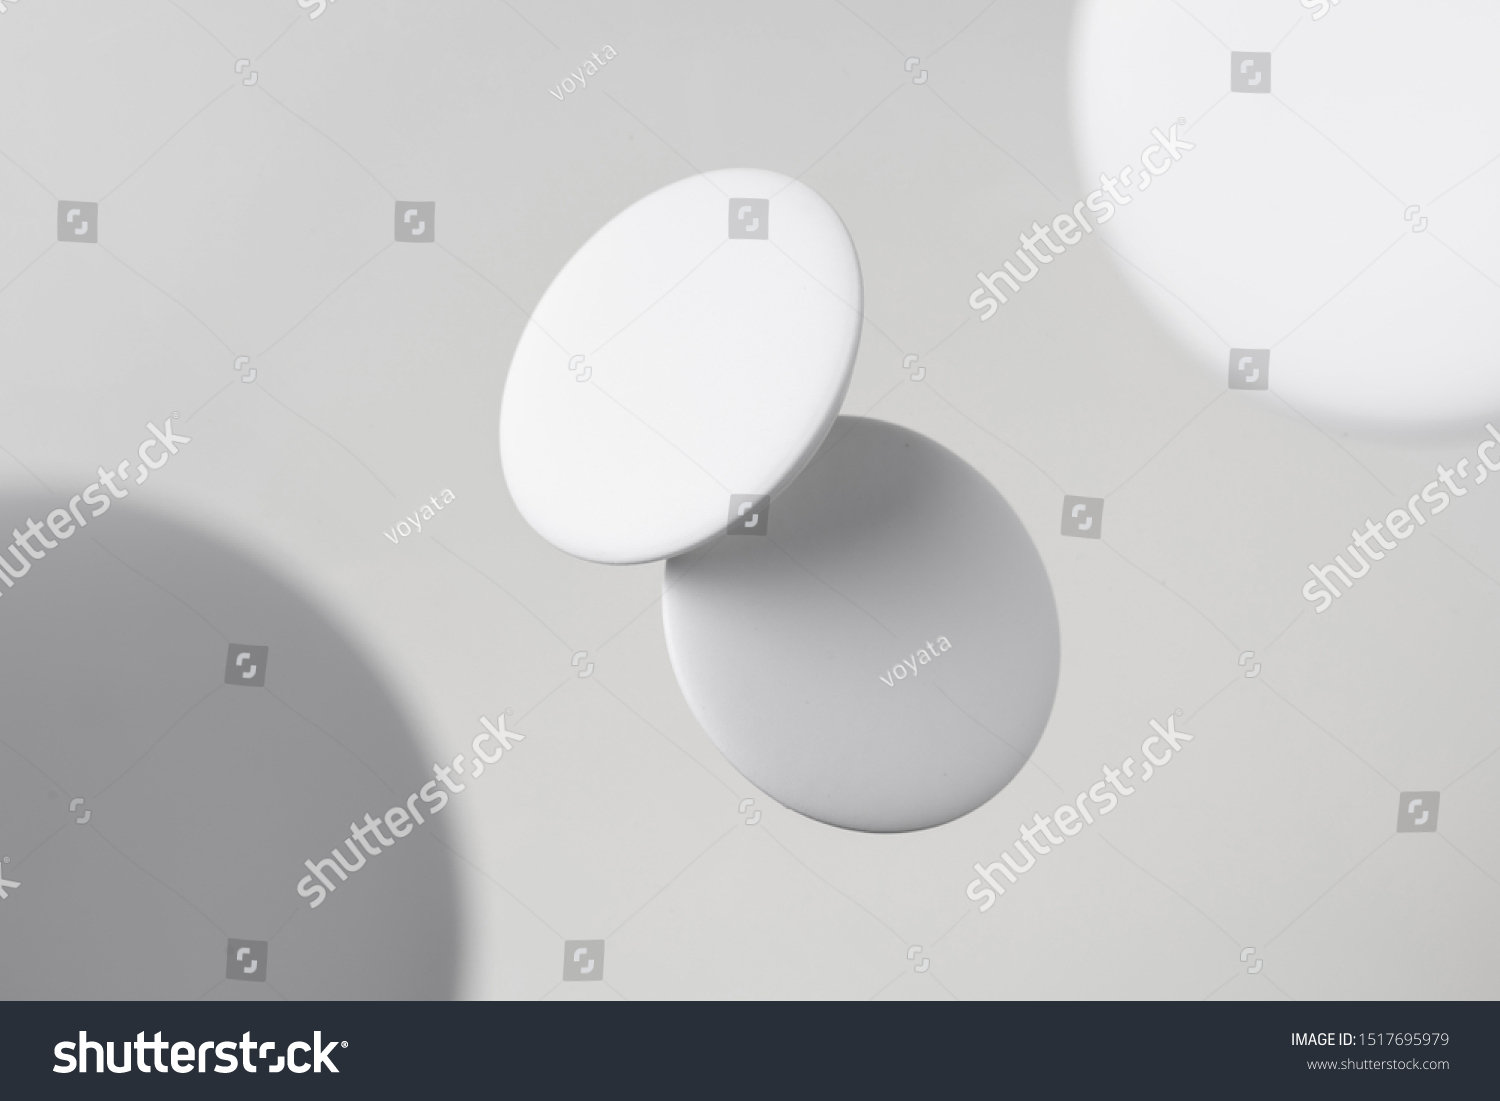 Design concept - top view of 2 white badge float on white background with blur effect for mockup, it's real photo, not 3D render #1517695979